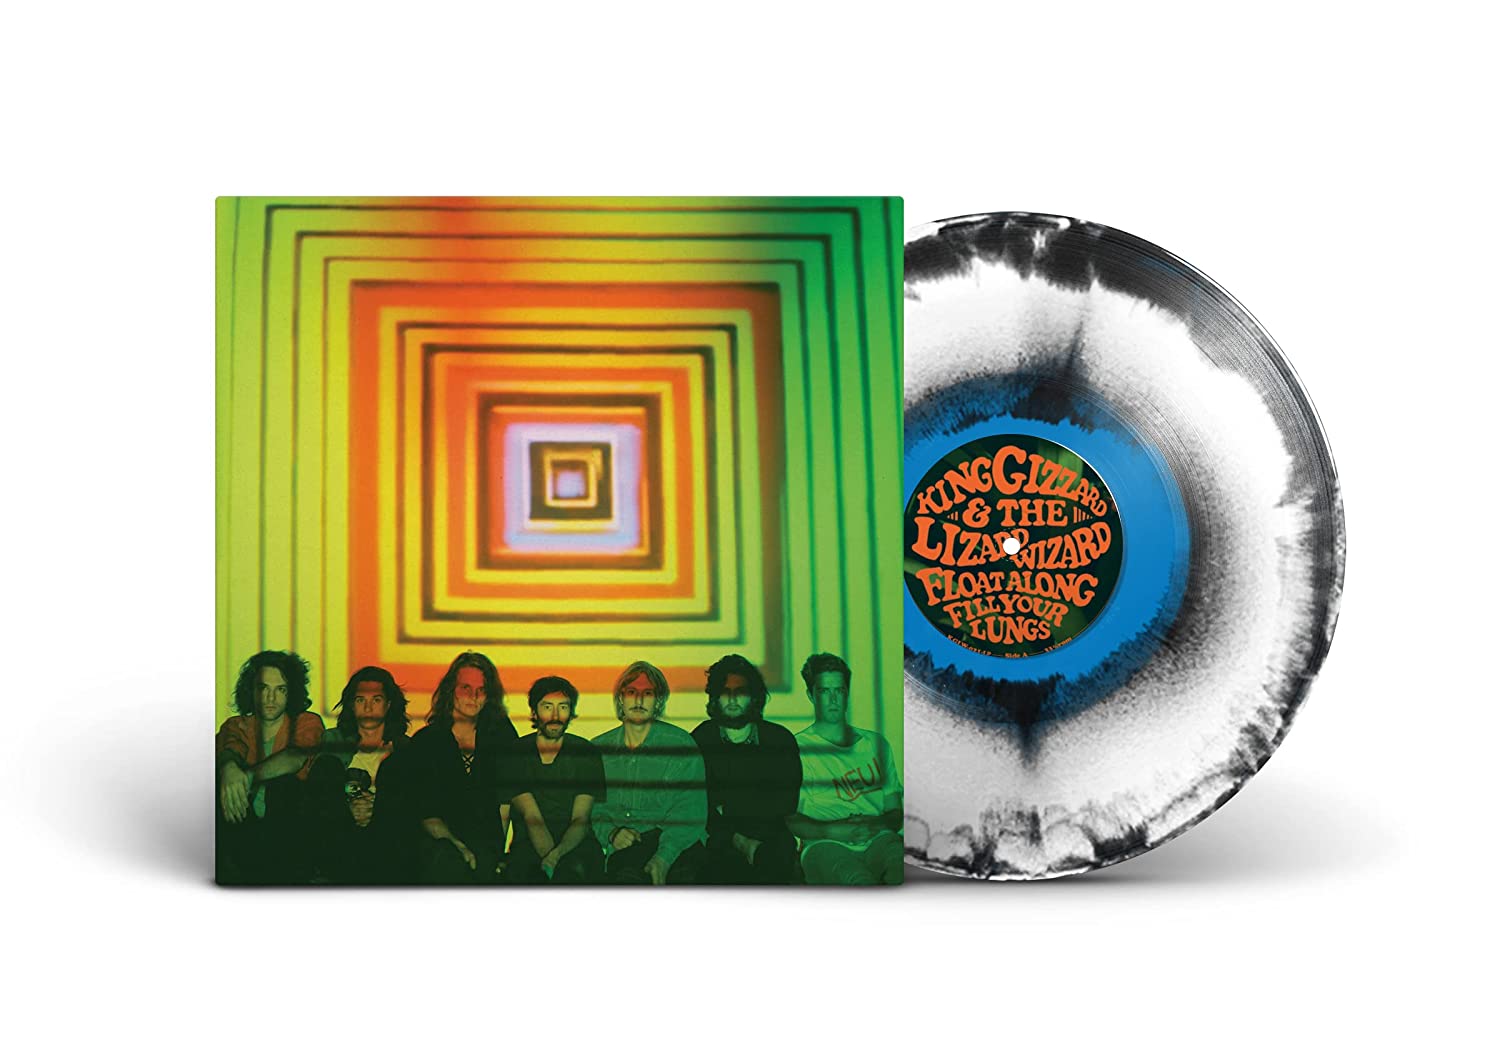 King Gizzard and the Lizard Wizard- Float Along - Fill Your Lungs [Venusian Sky] - Darkside Records